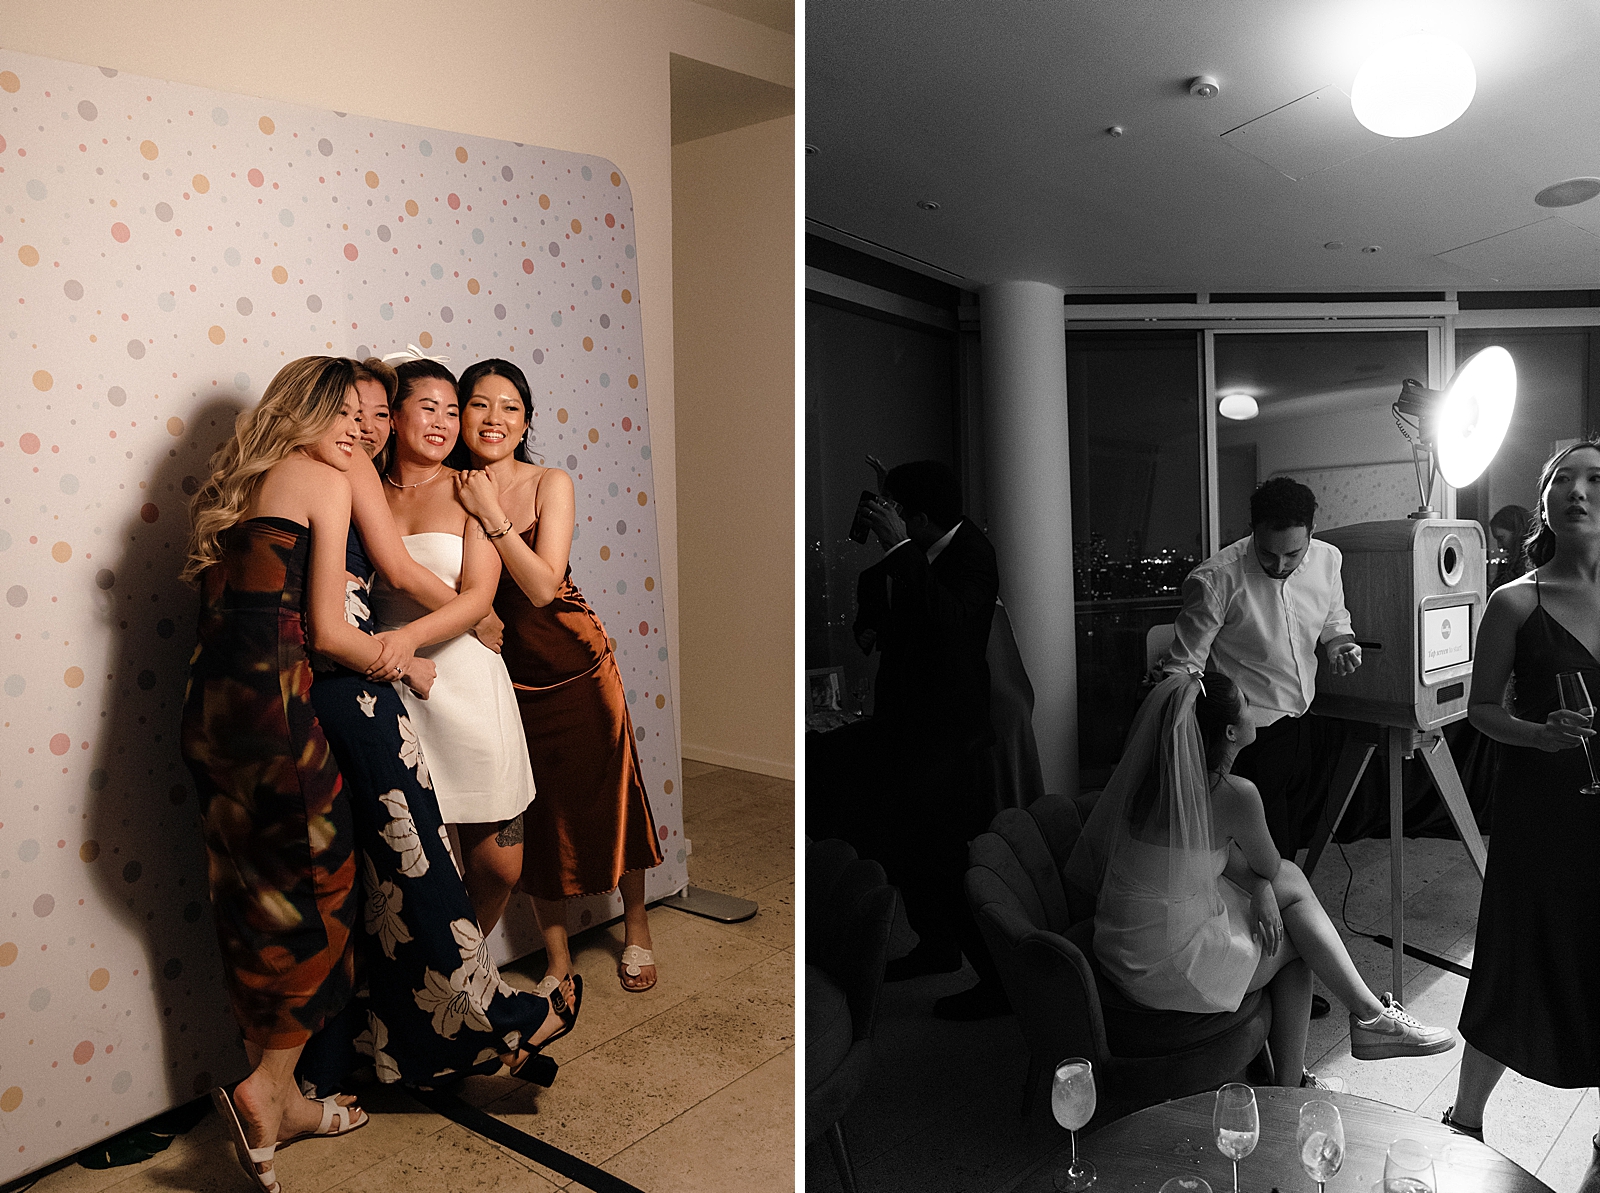 Left photo: Shot of the bride and three of her guests posing for the photo booth. 
Right photo: Shot of the bride and groom resting by the photo booth. 